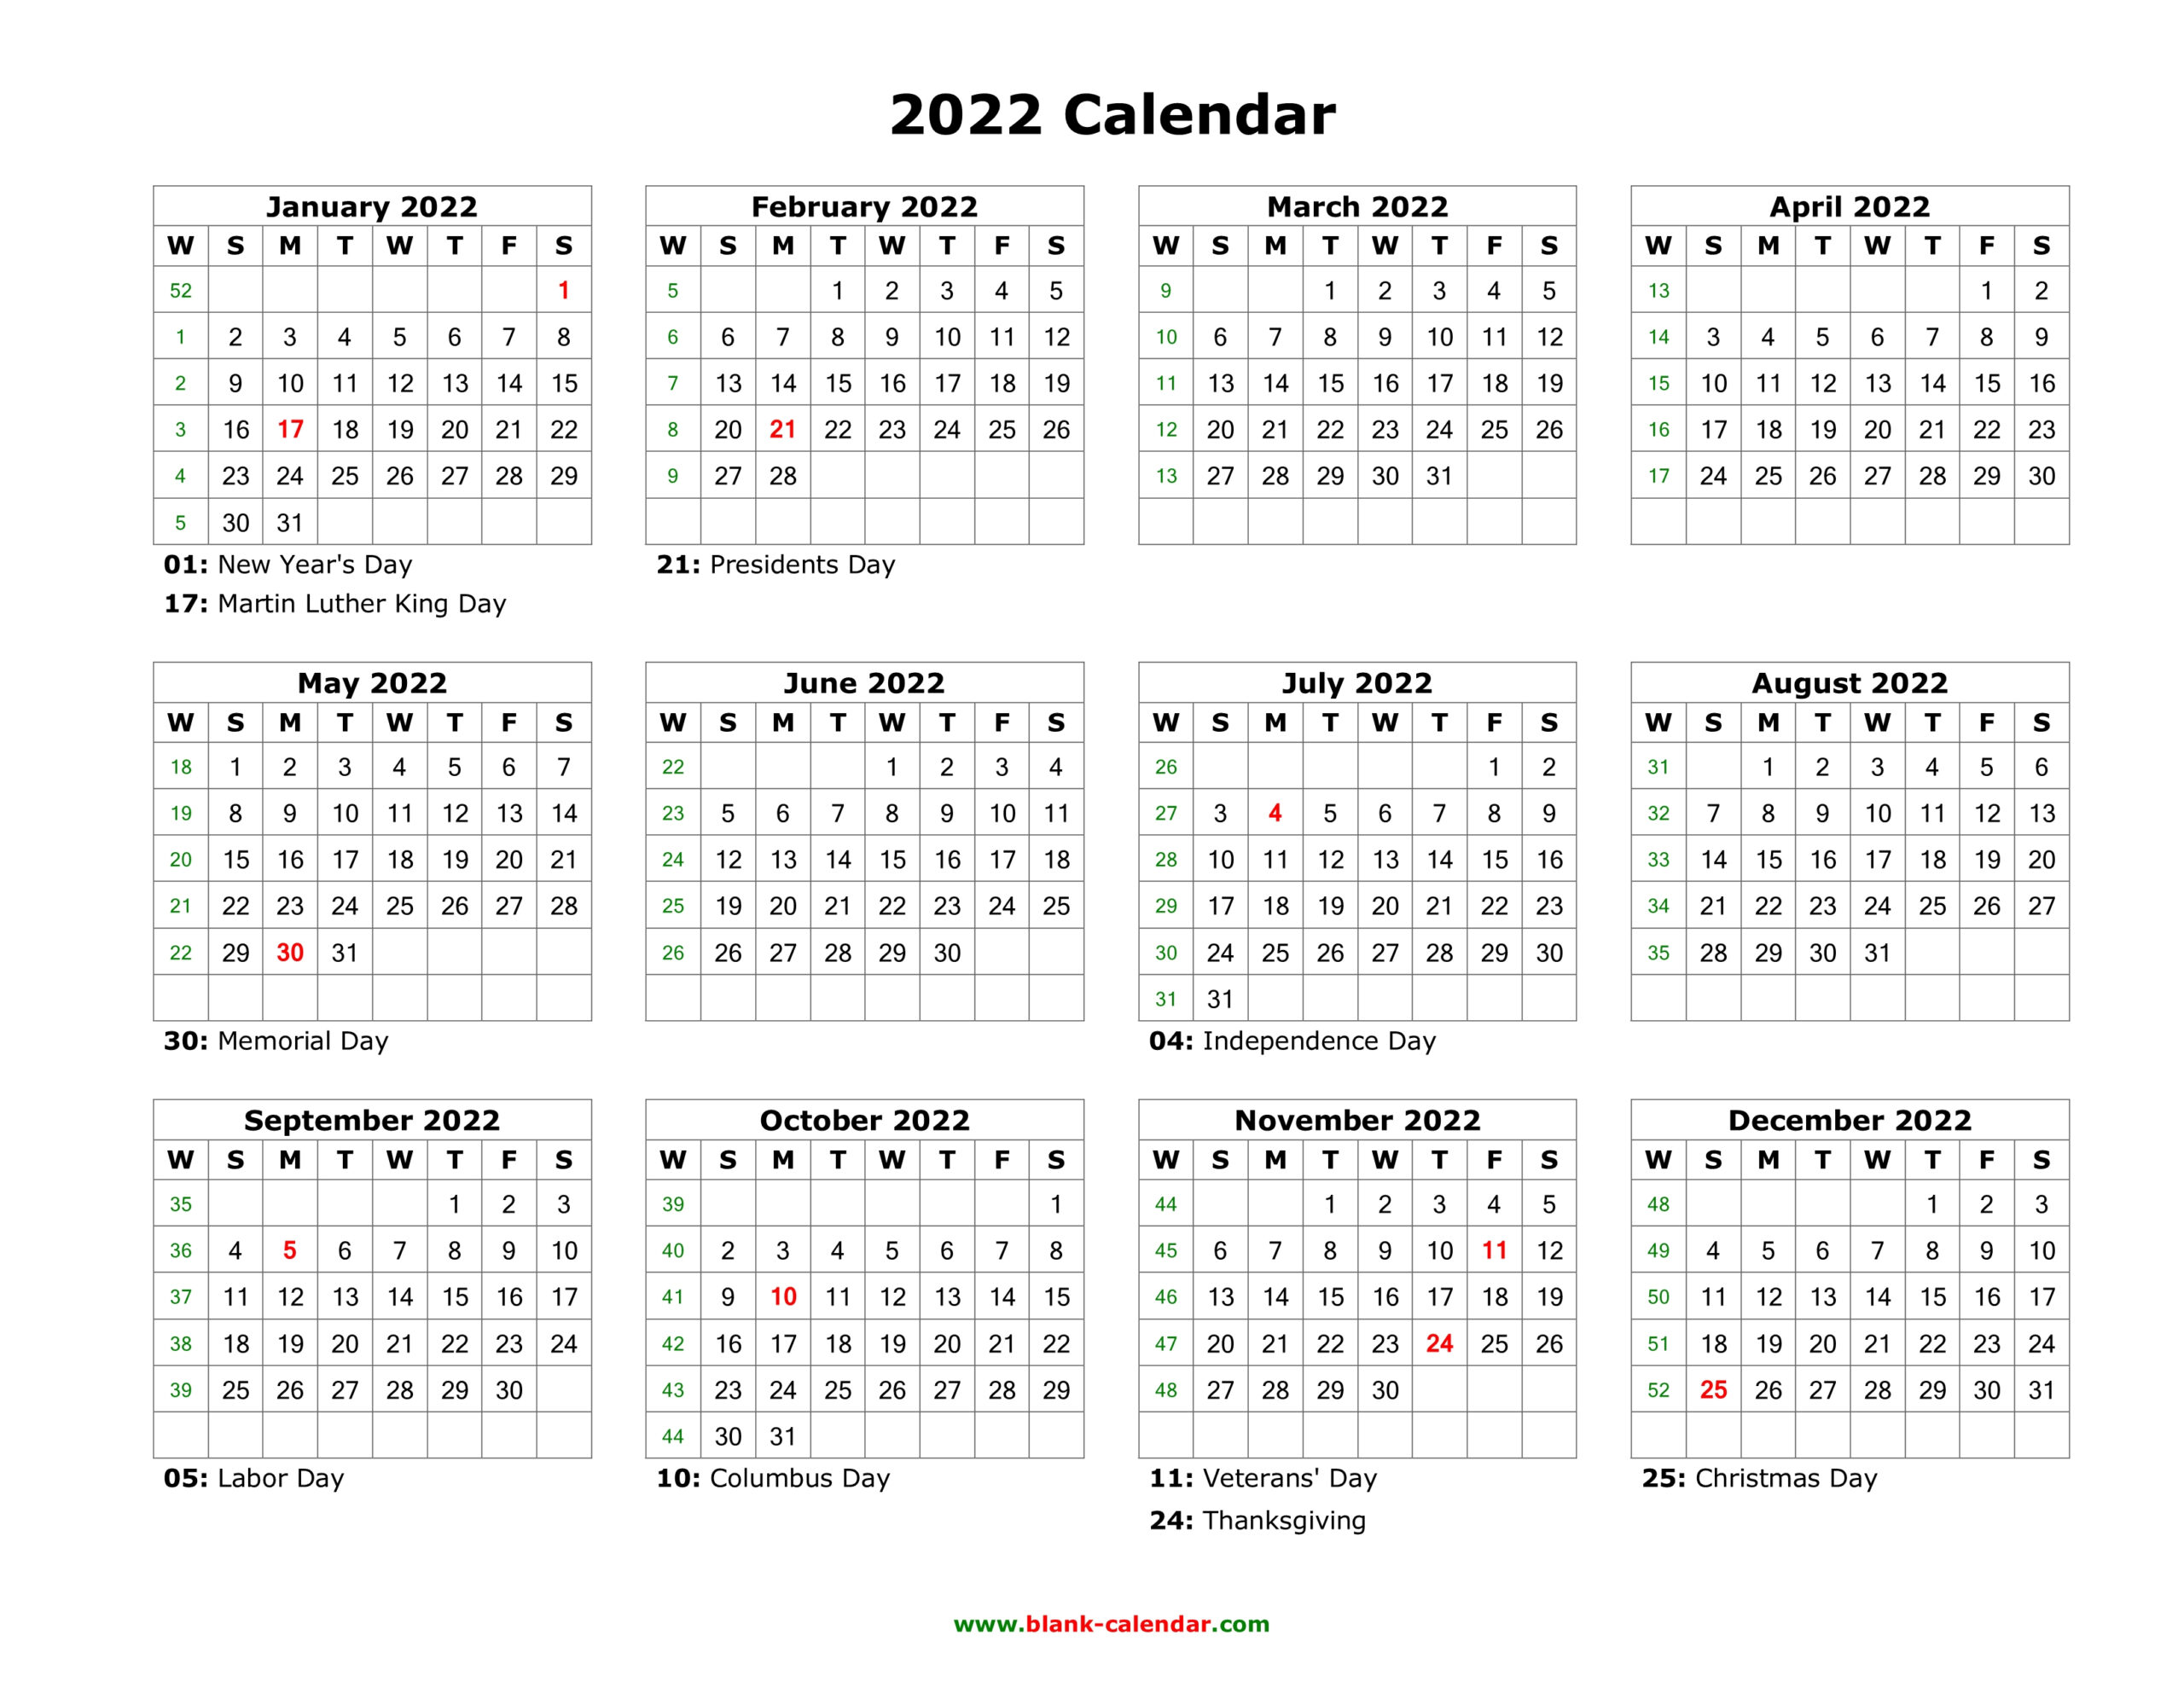 Download Blank Calendar 2022 With Us Holidays (12 Months On